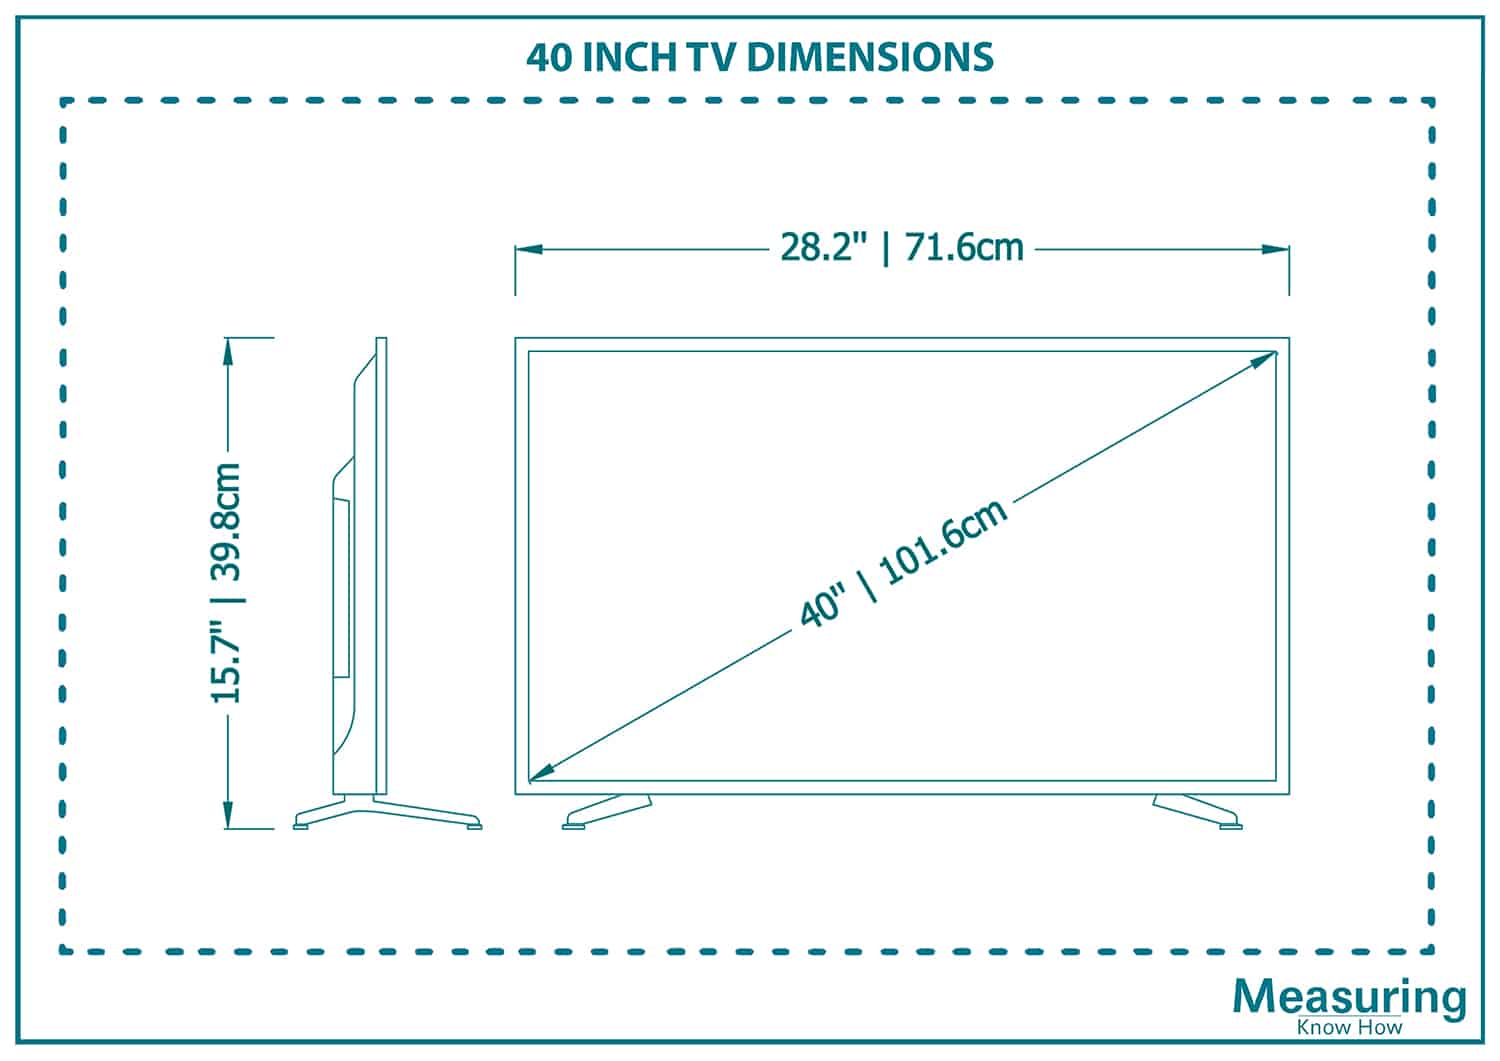 What Are the Average 40 inch TV Dimensions? MeasuringKnowHow